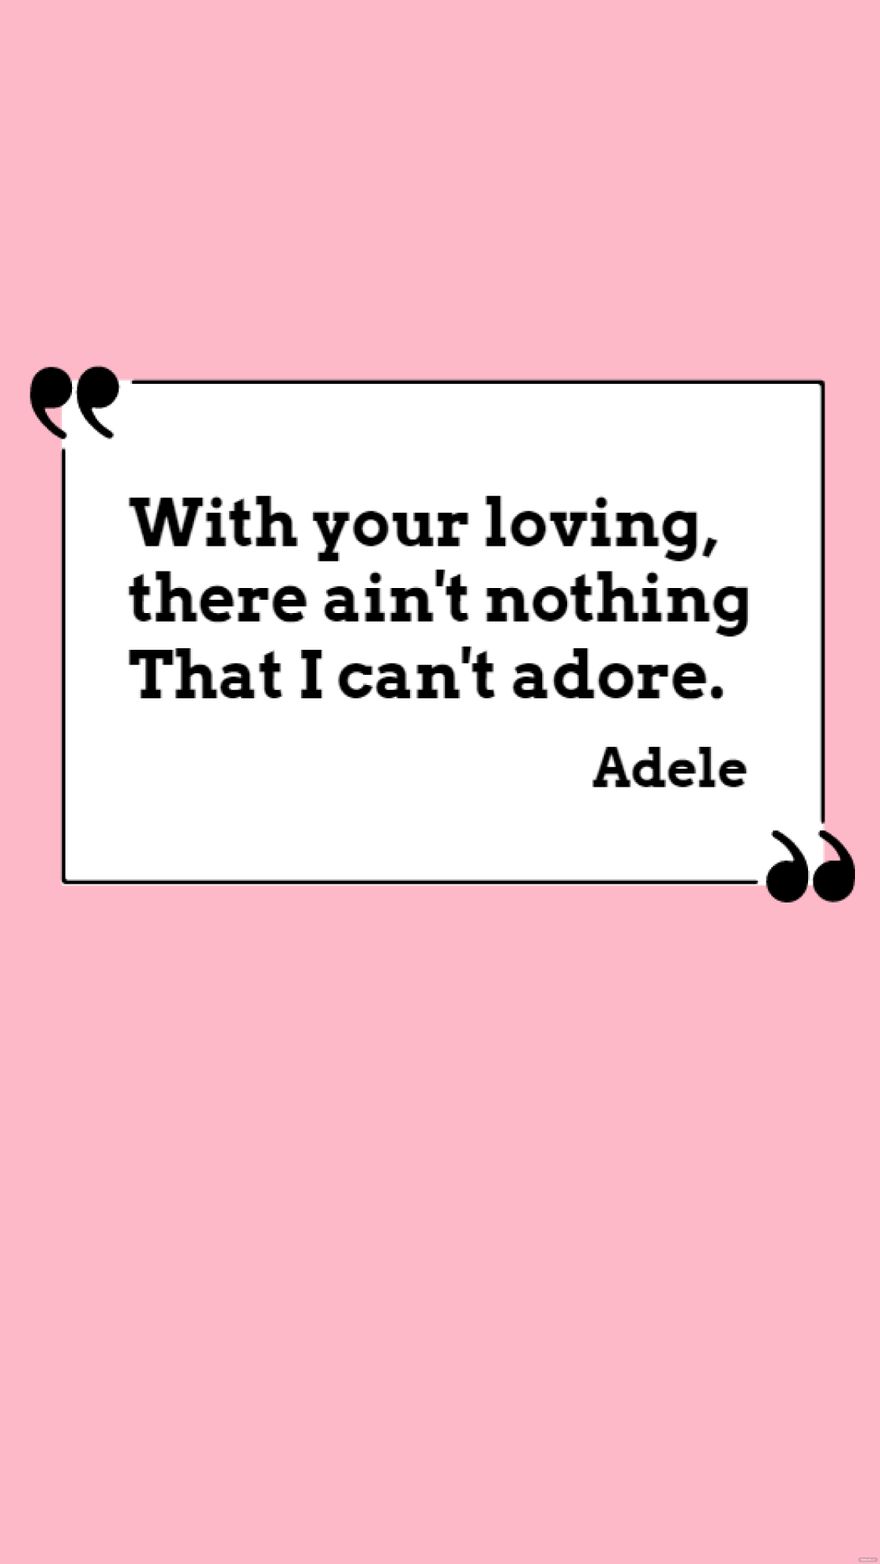 Adele - With your loving, there ain't nothing that I can't adore. in JPG